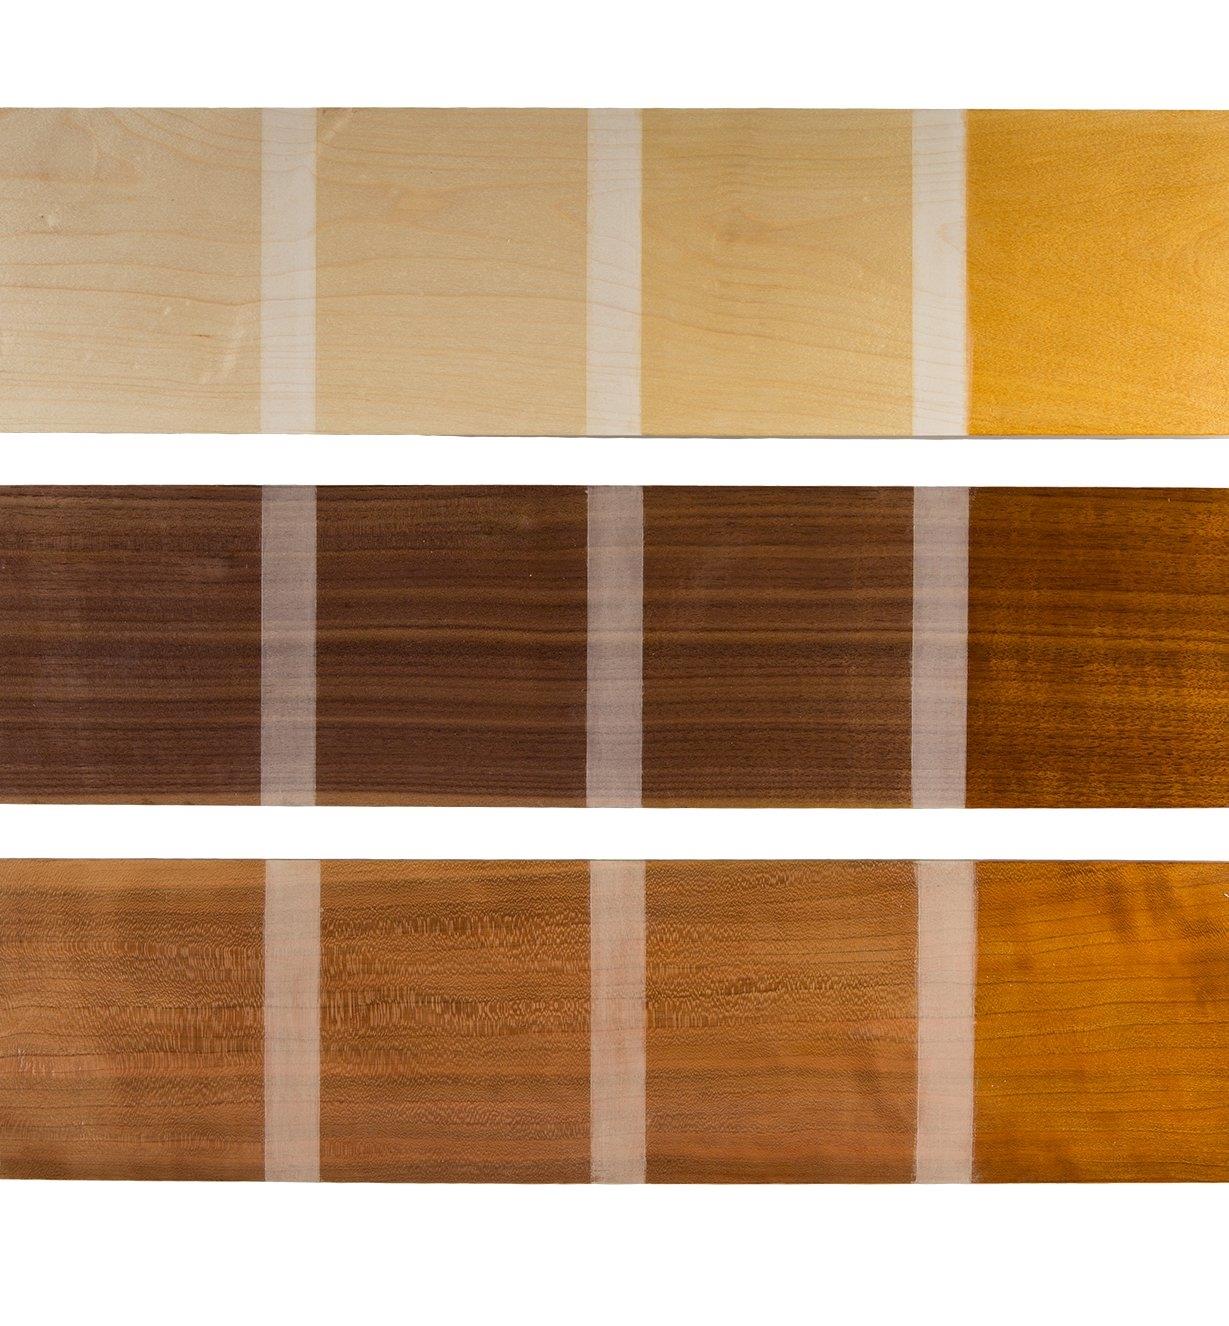 Examples of shellac colors on different woods